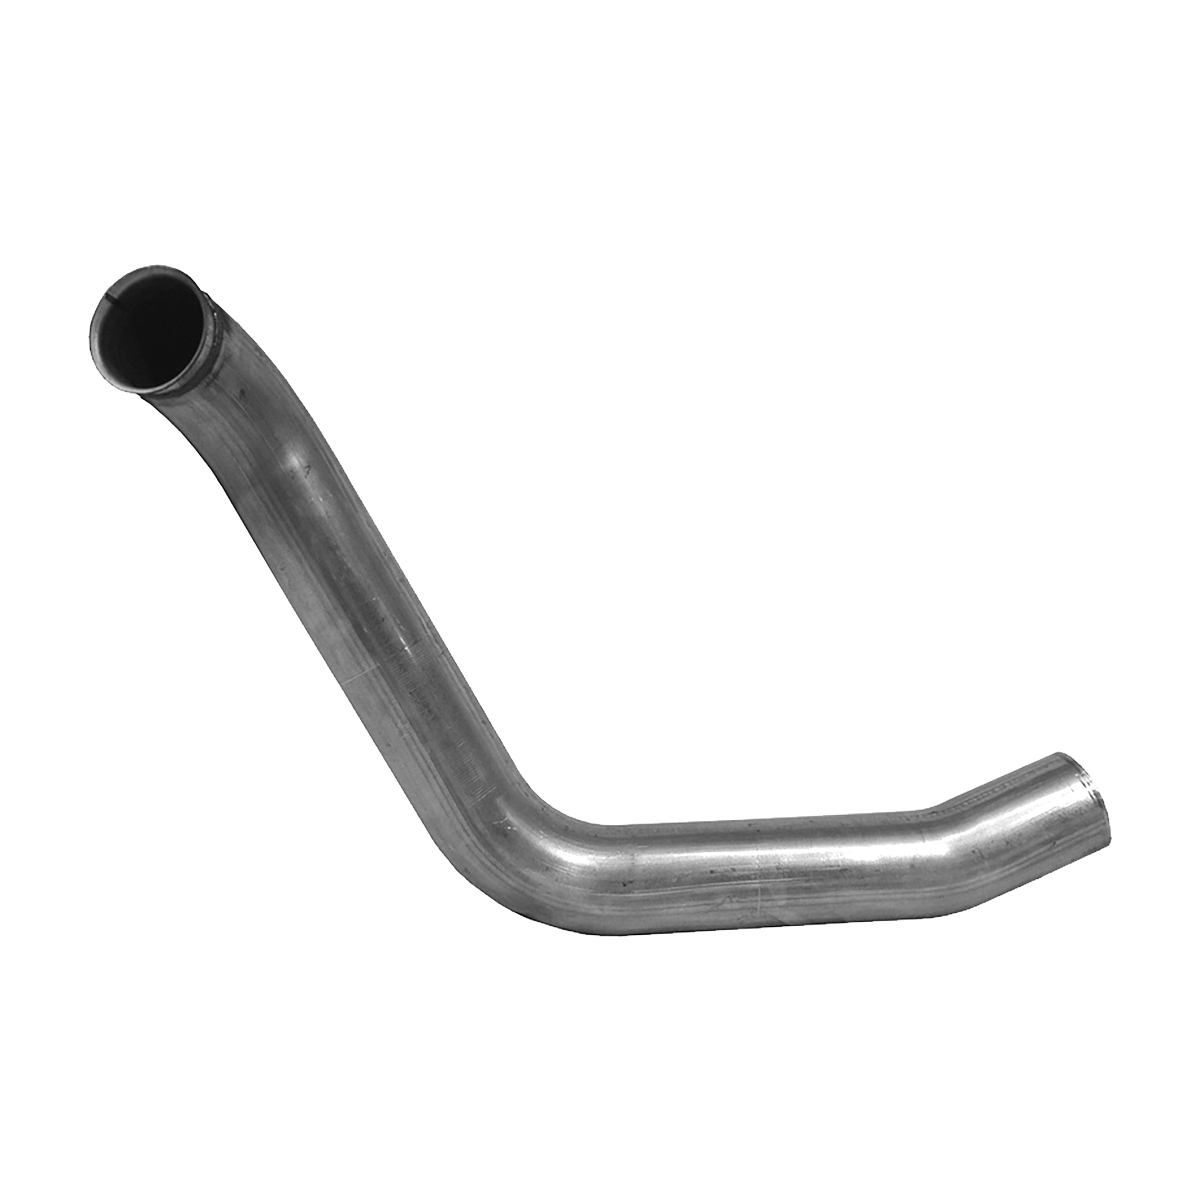 Armor Lite Series Ford 4 Inch Down Pipe For 99-03 Ford F-250/350 7.3L Powerstroke MBRP